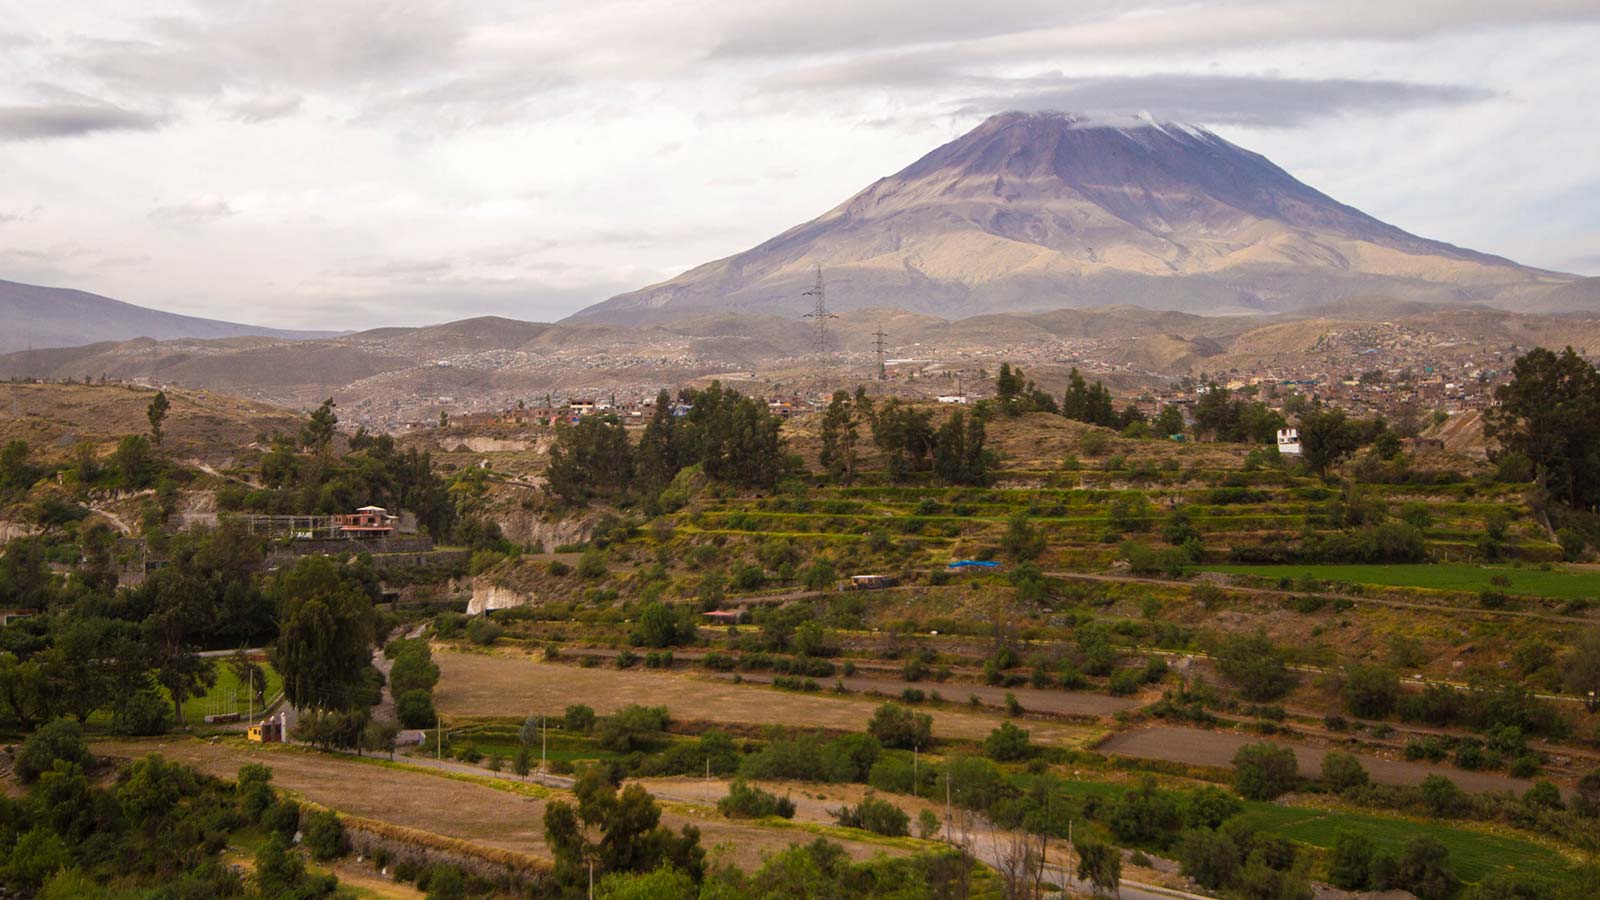 Although Peru's second largest city offers some of the Peru's best food, architecture, and landscape, it's often overlooked by those who travel to Peru. But there are so many amazing things to do in Arequipa Peru that we had to list our favorite adventures for the whole family.